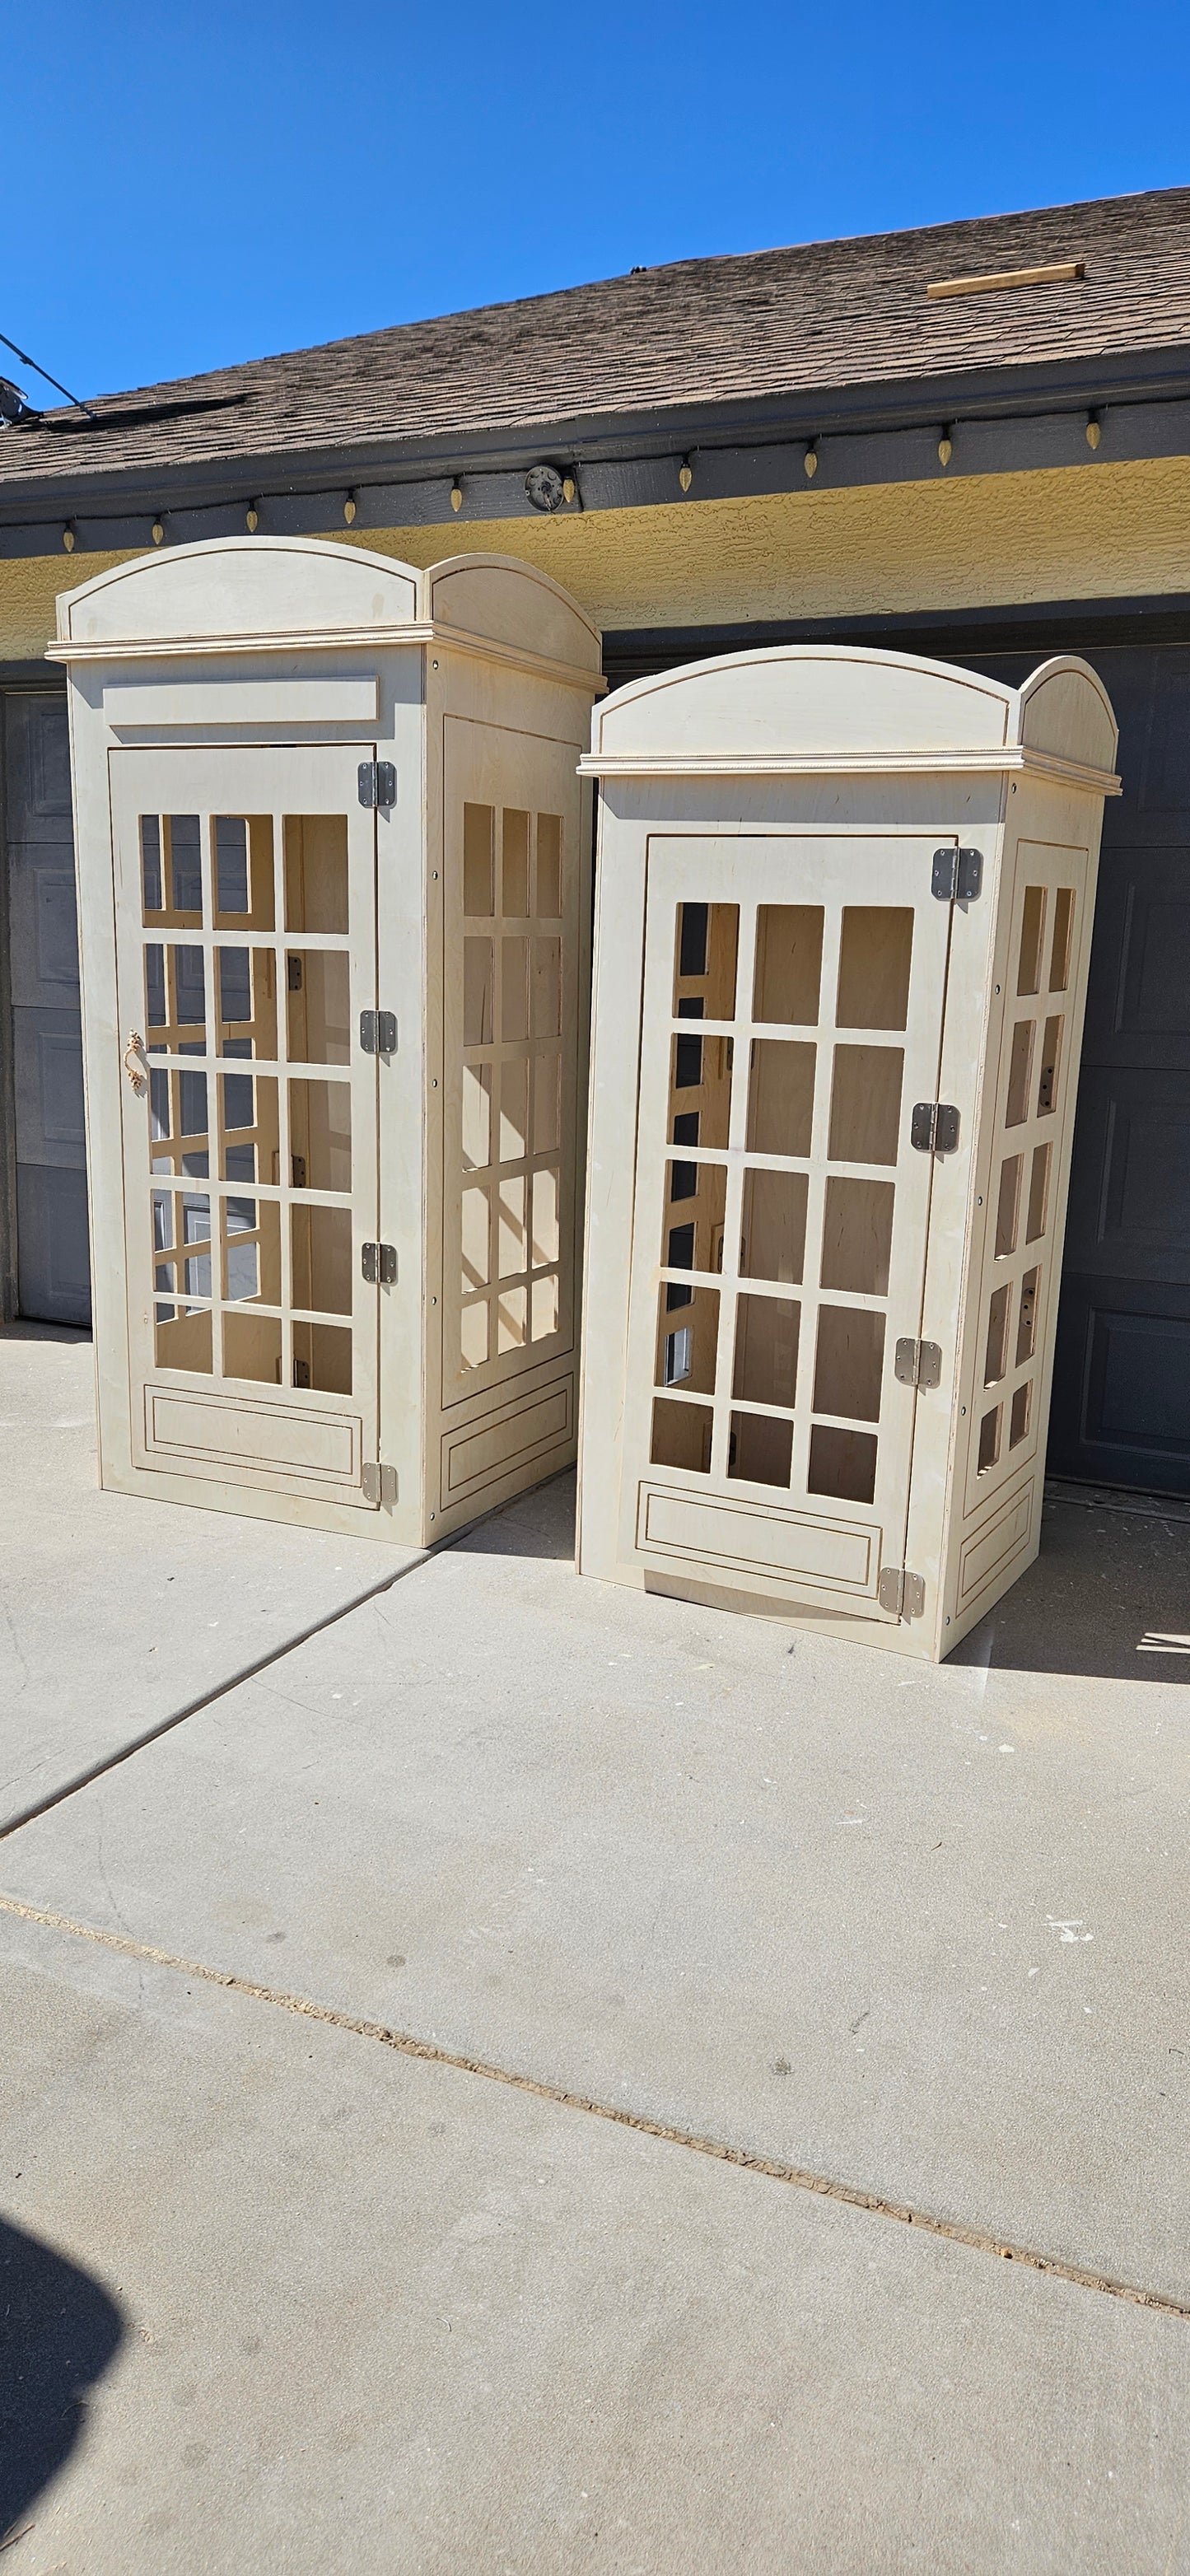 Telephone booth - Fully collapsible